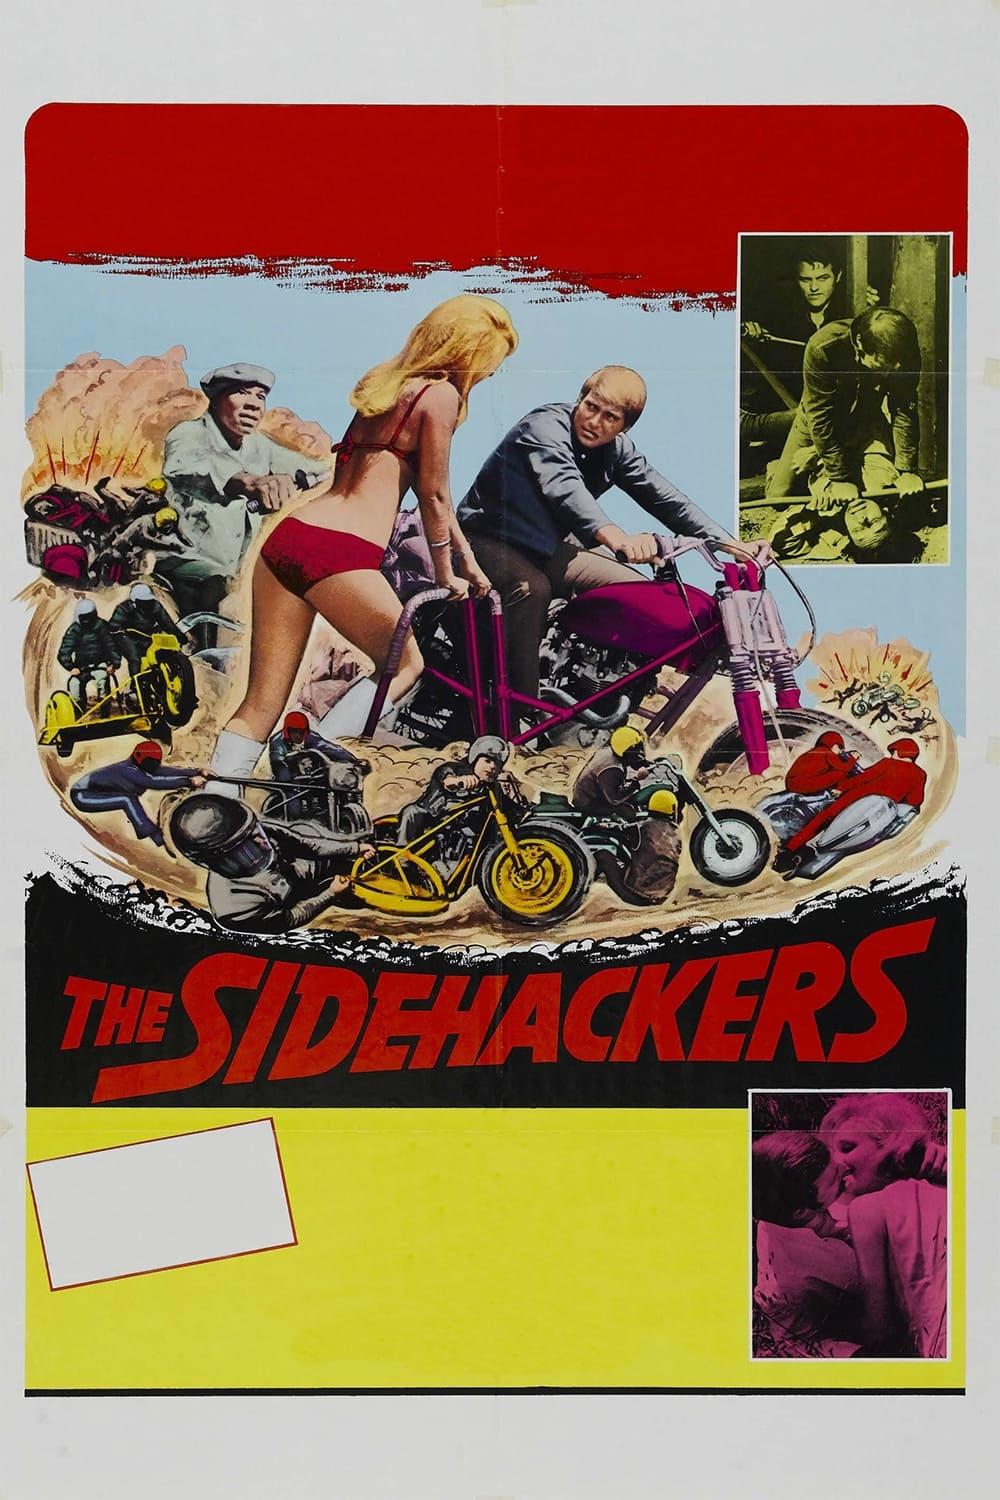 The Sidehackers poster